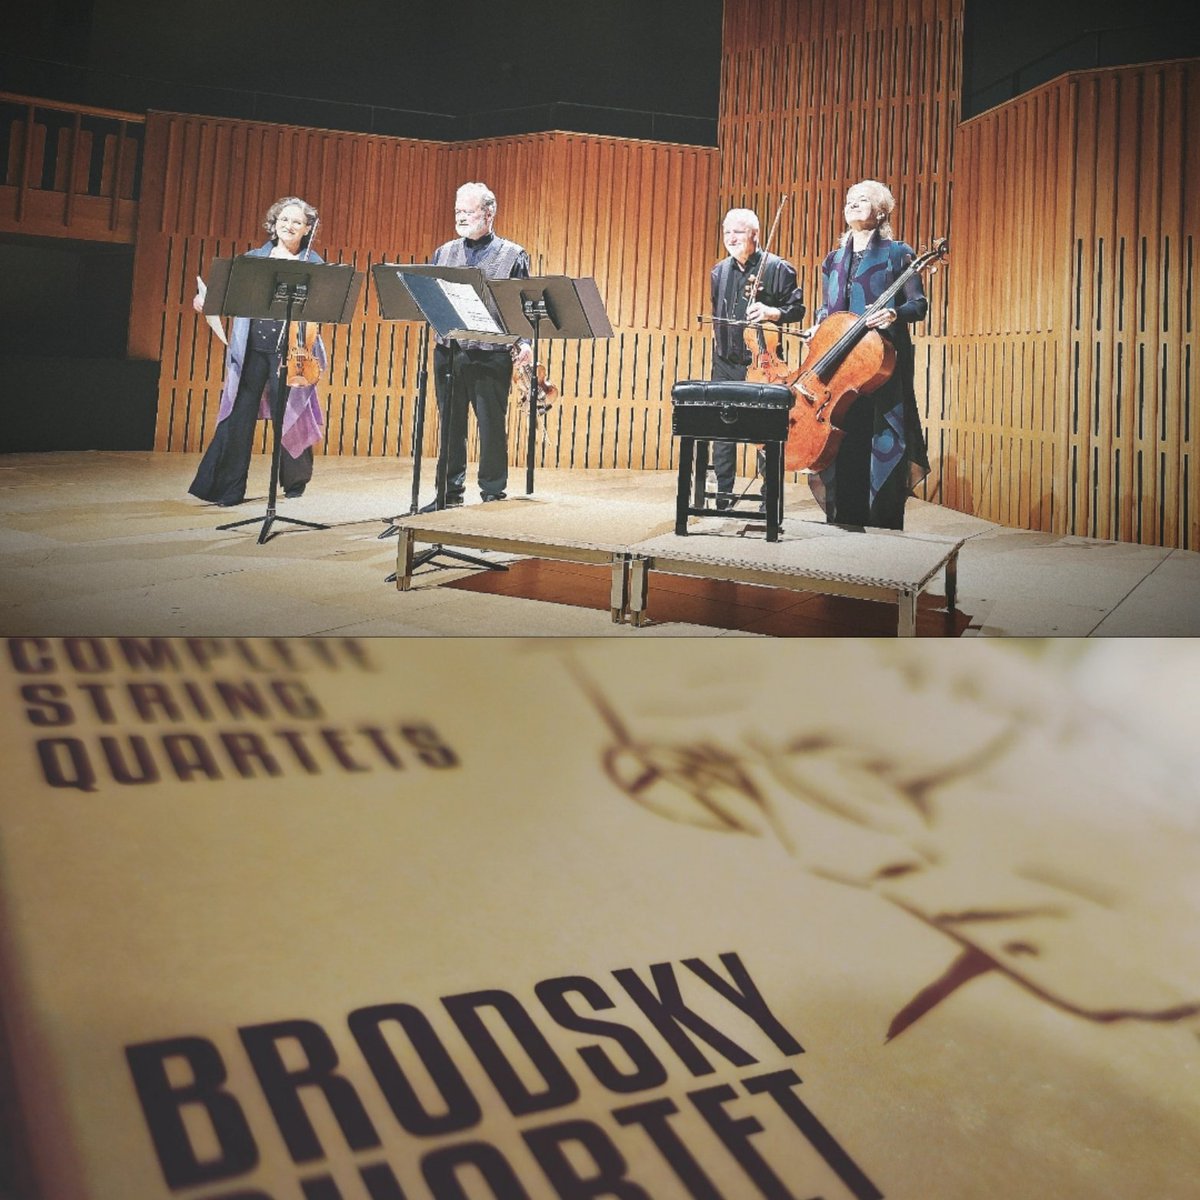 All fifteen of Shostakovich's works over two days...
The #BrodskyQuartet were simply amazing, in a fantastic venue, with the music capturing every human emotion possible. Hearing them talk so passionately about each piece added immeasurably.
Thank you @Howard_Assembly